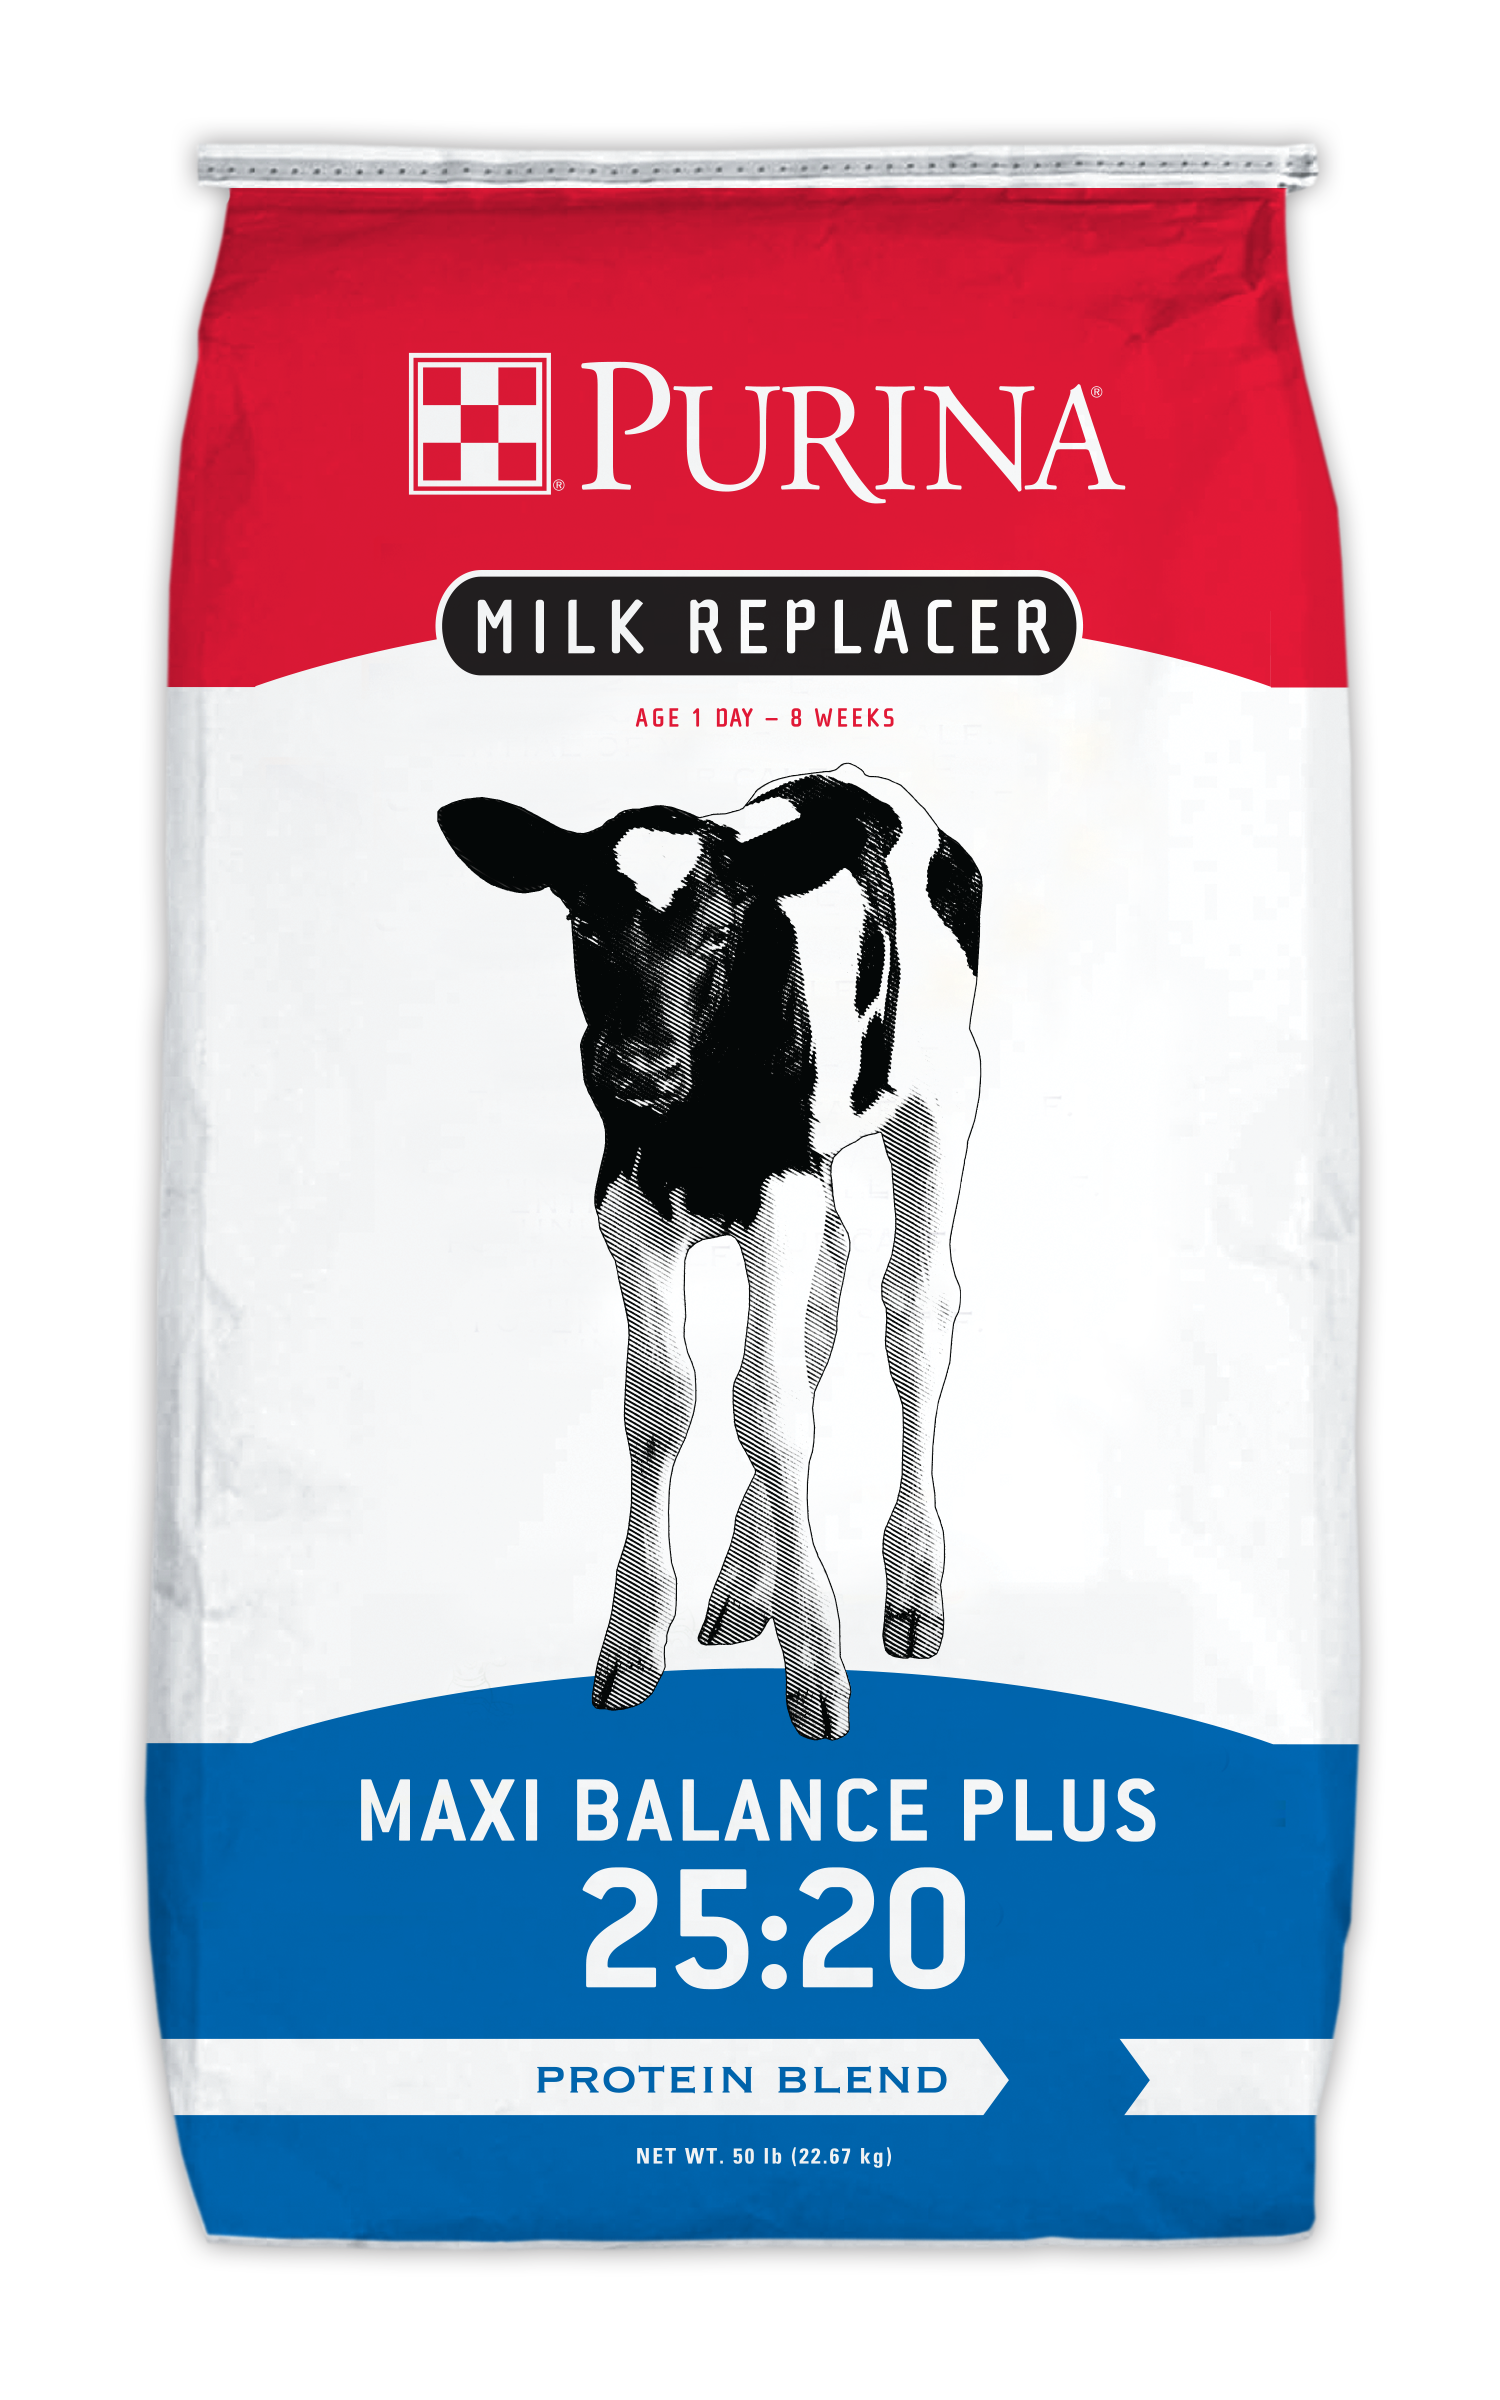 Image of Purina® Maxi Balance® Plus Protein Blend feed